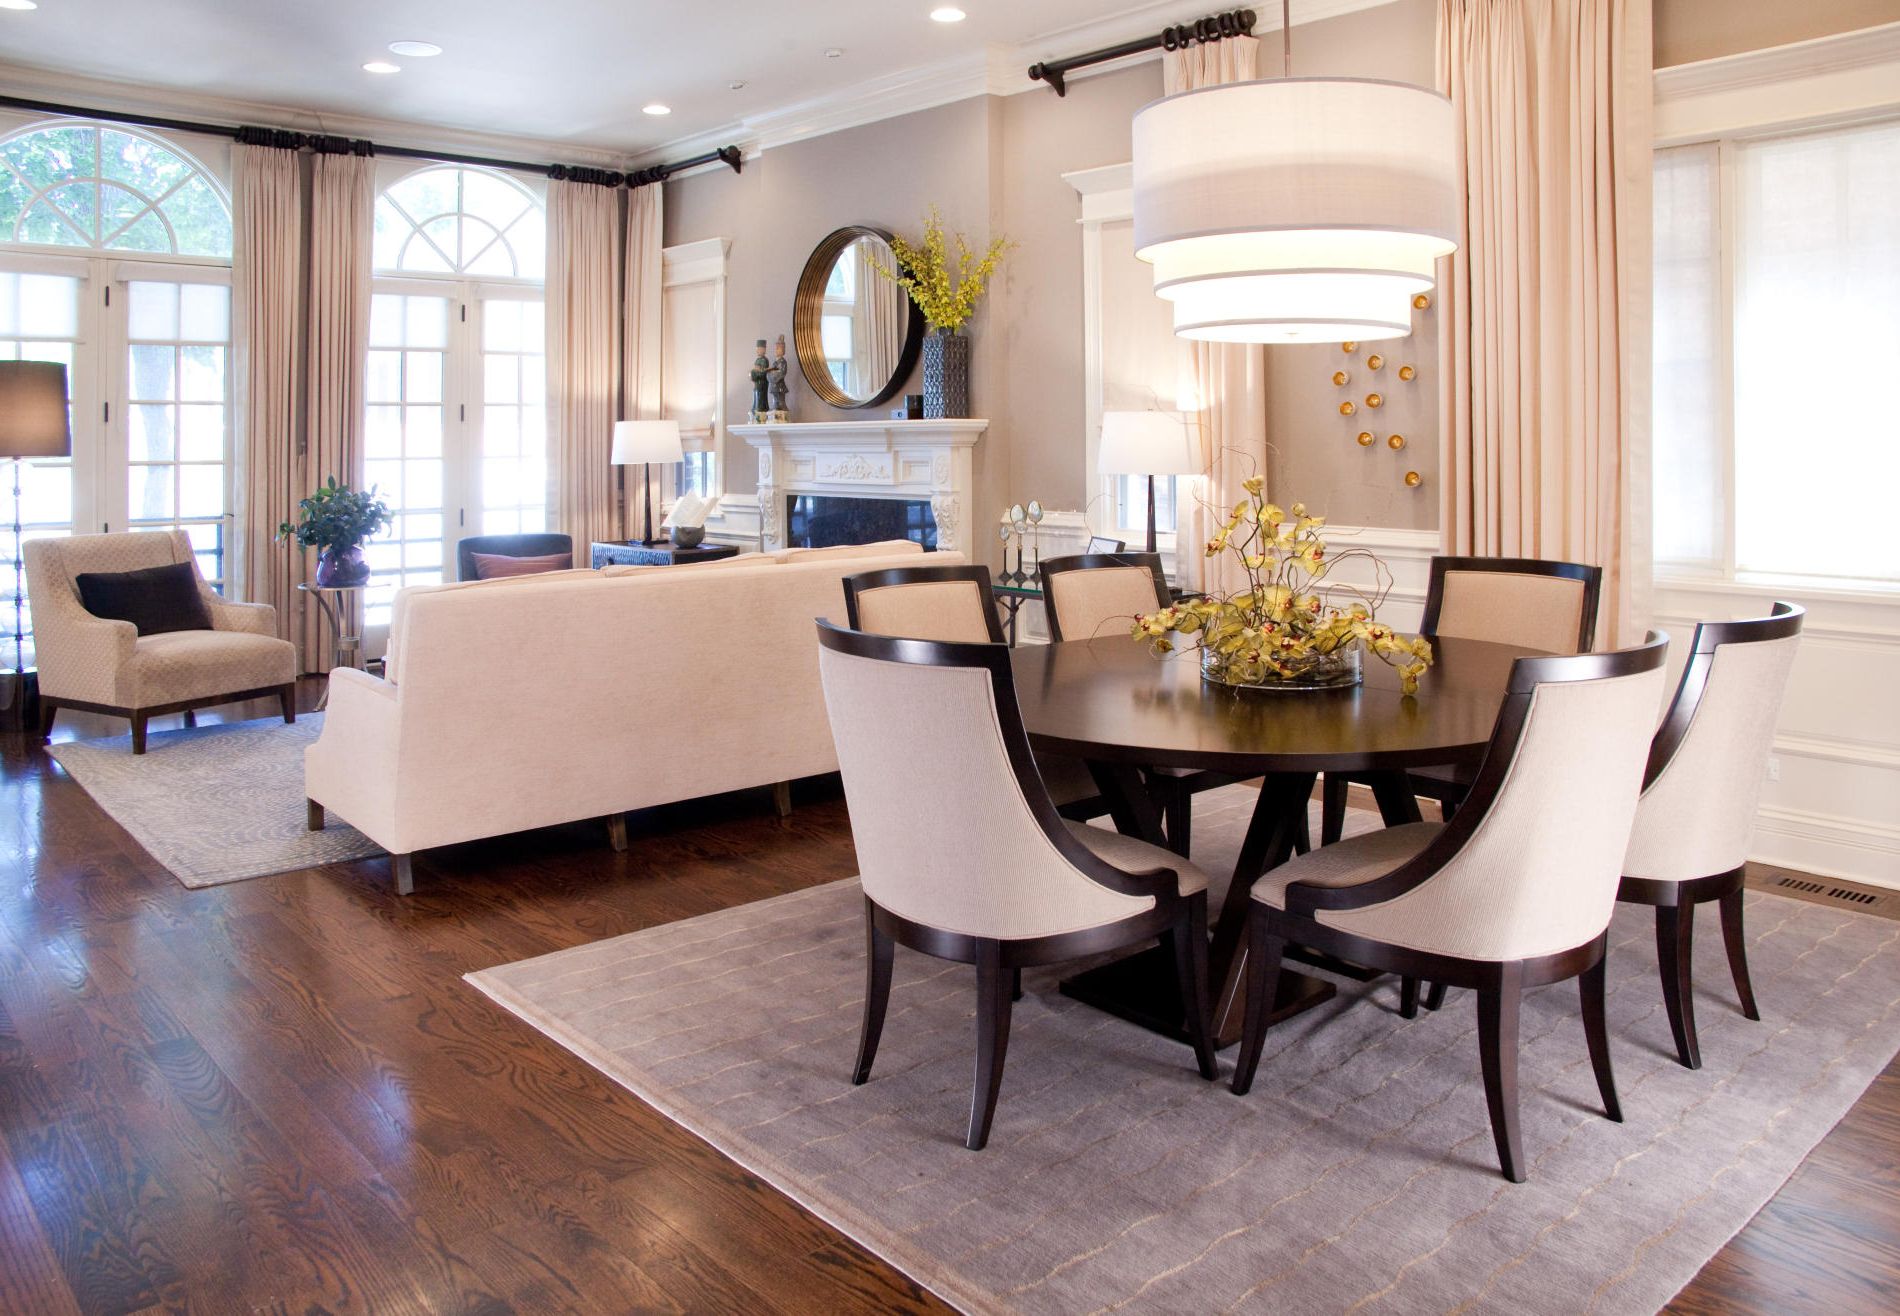 Condo Living Room Combined With Dining Table